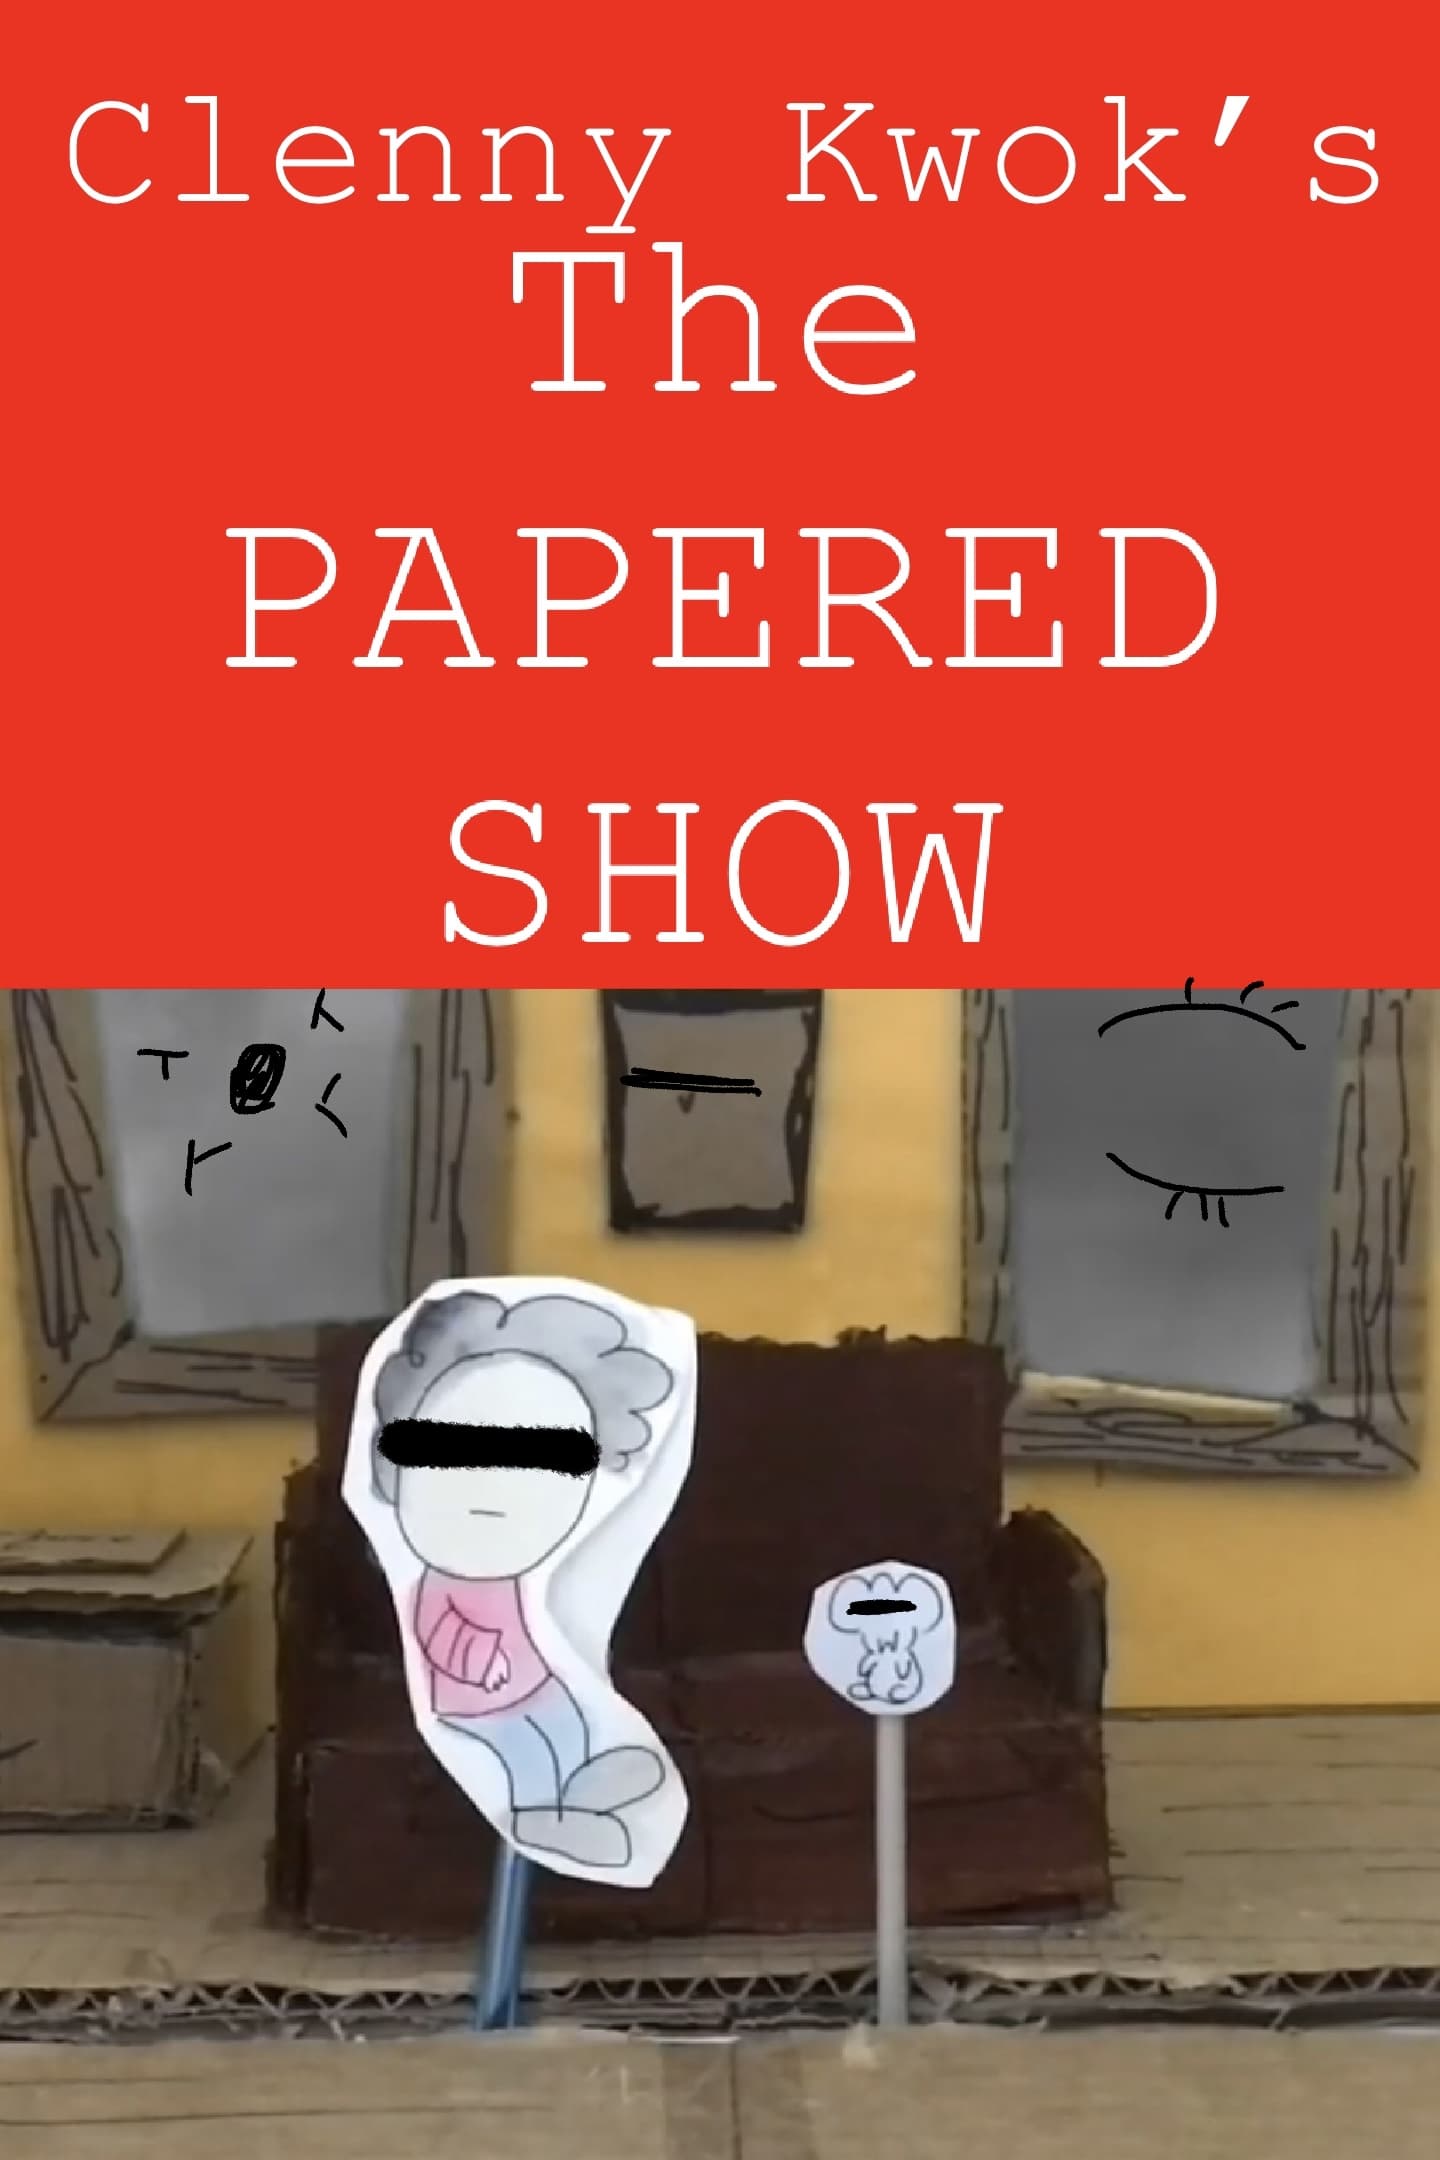 The Papered Show